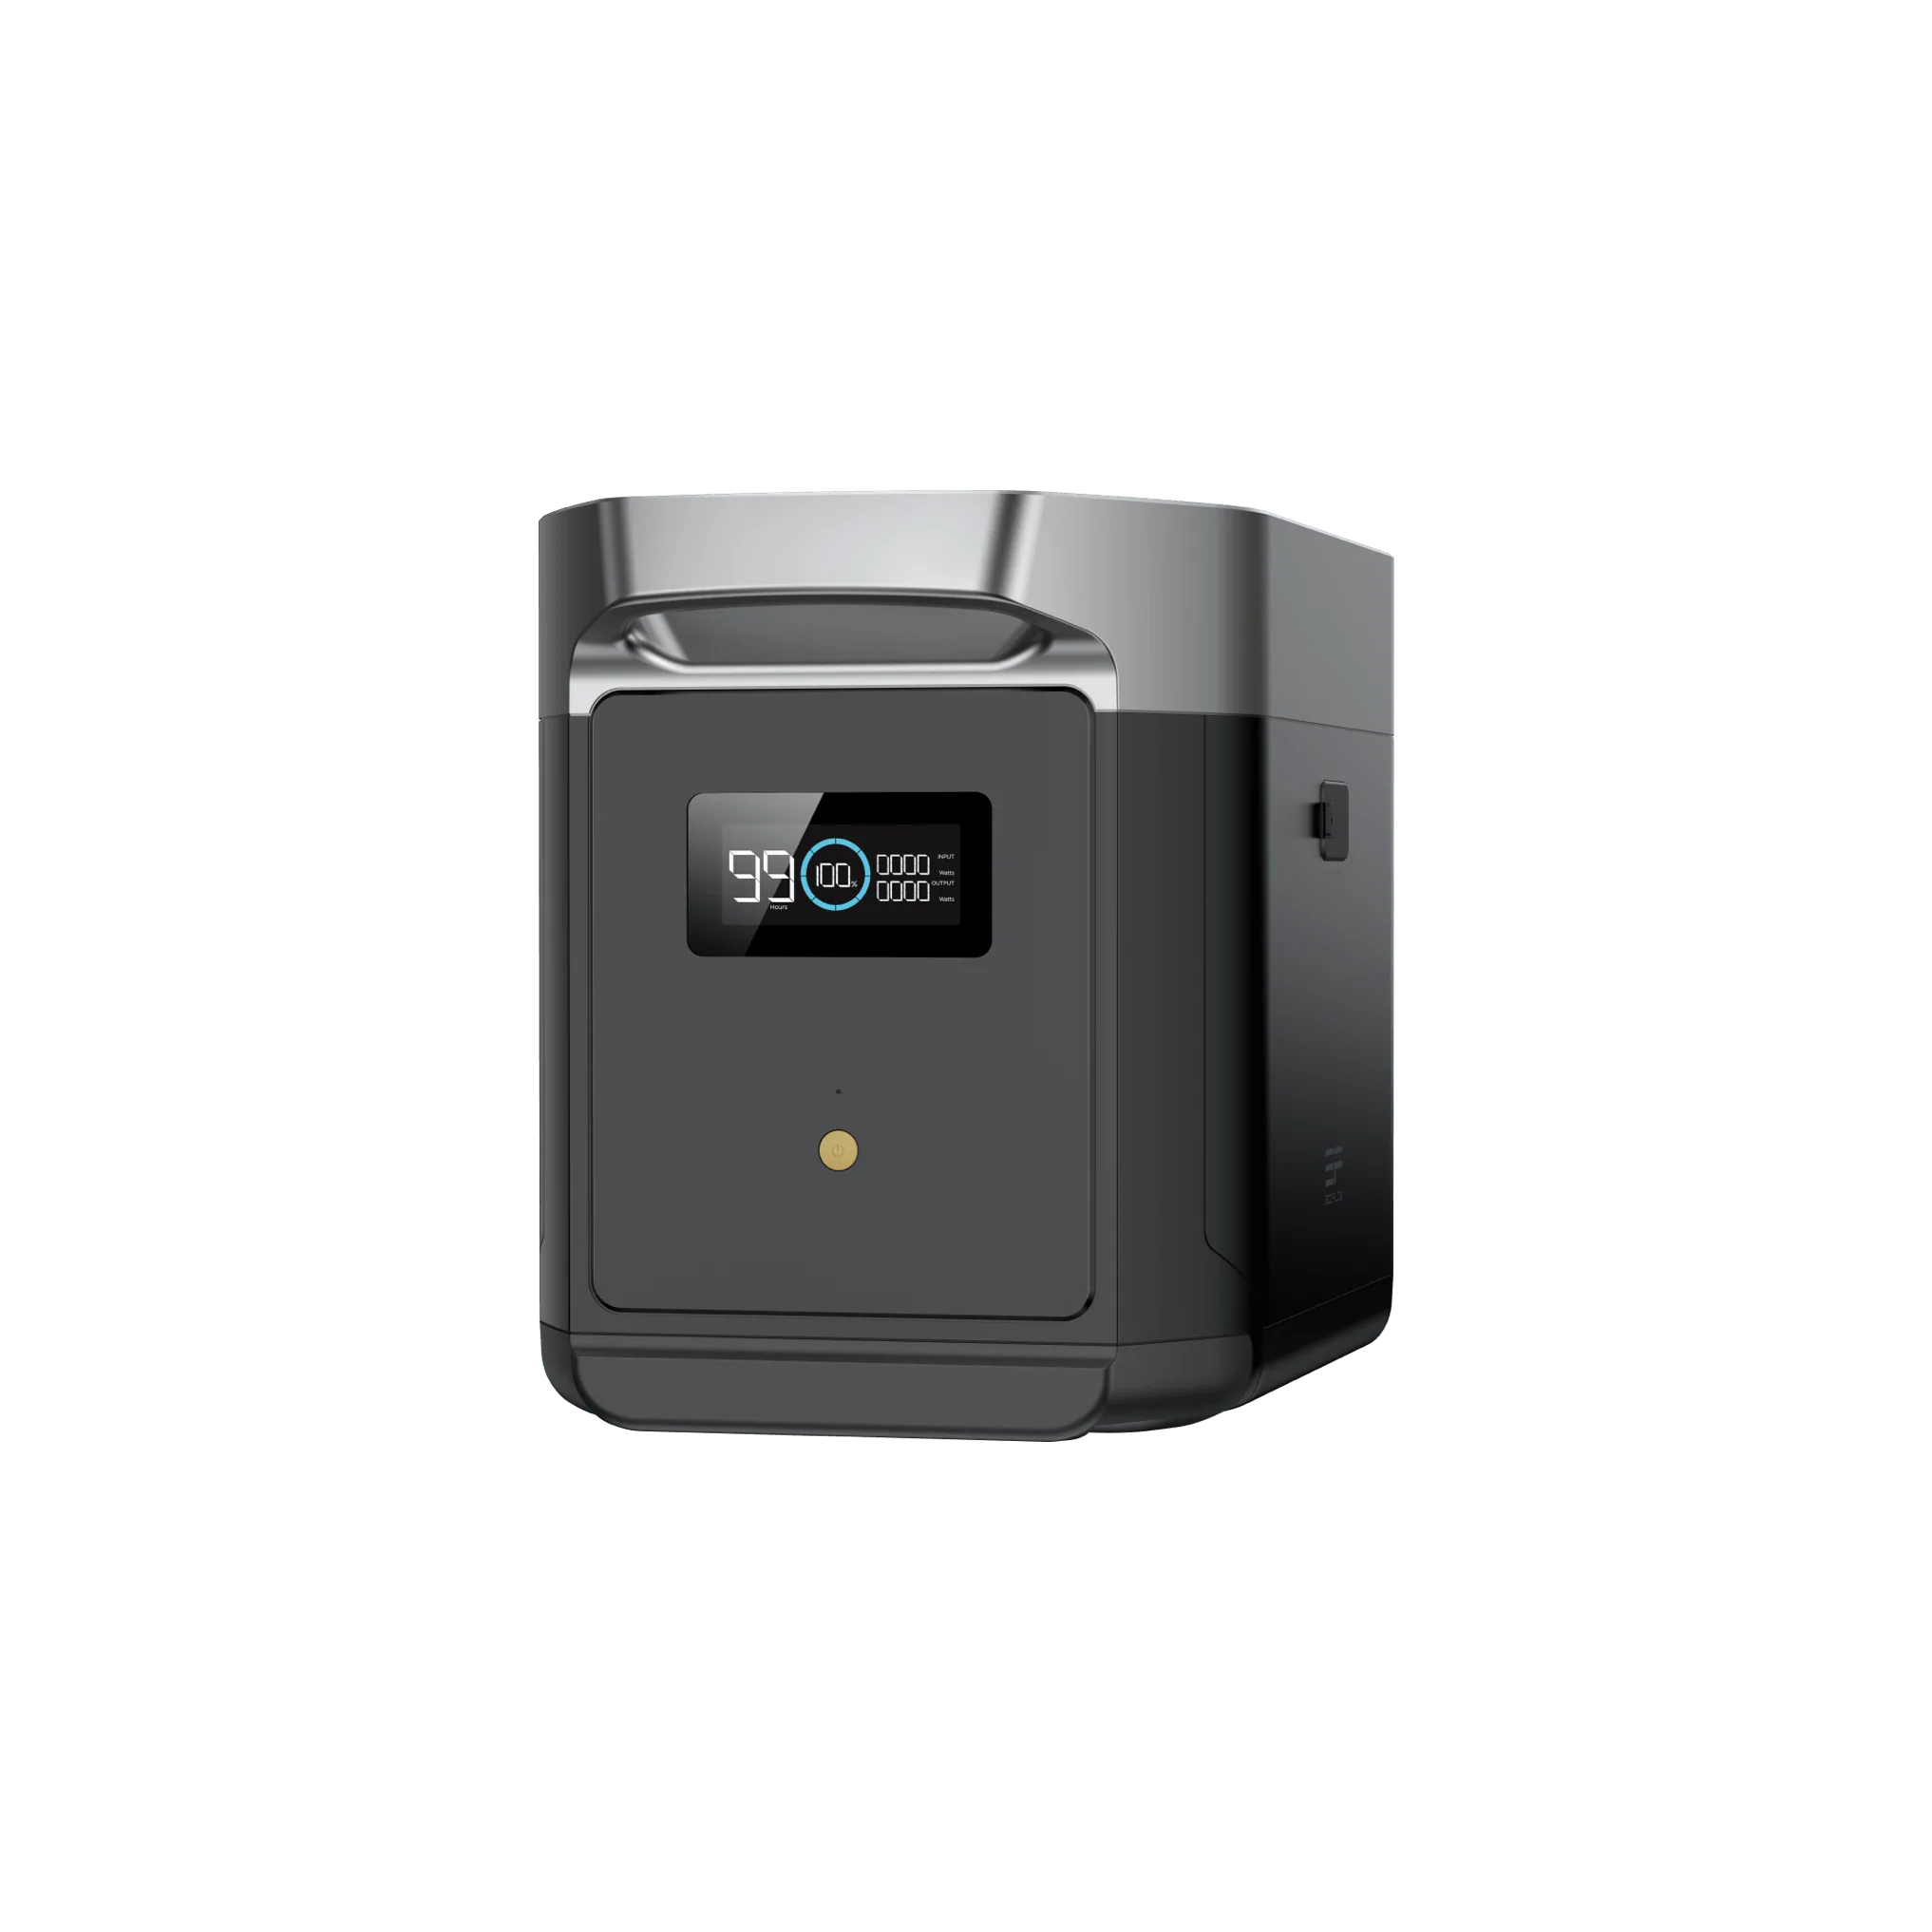 A black and white machine with a clock on it that can be powered by the EcoFlow DELTA Max Smart Extra Battery.